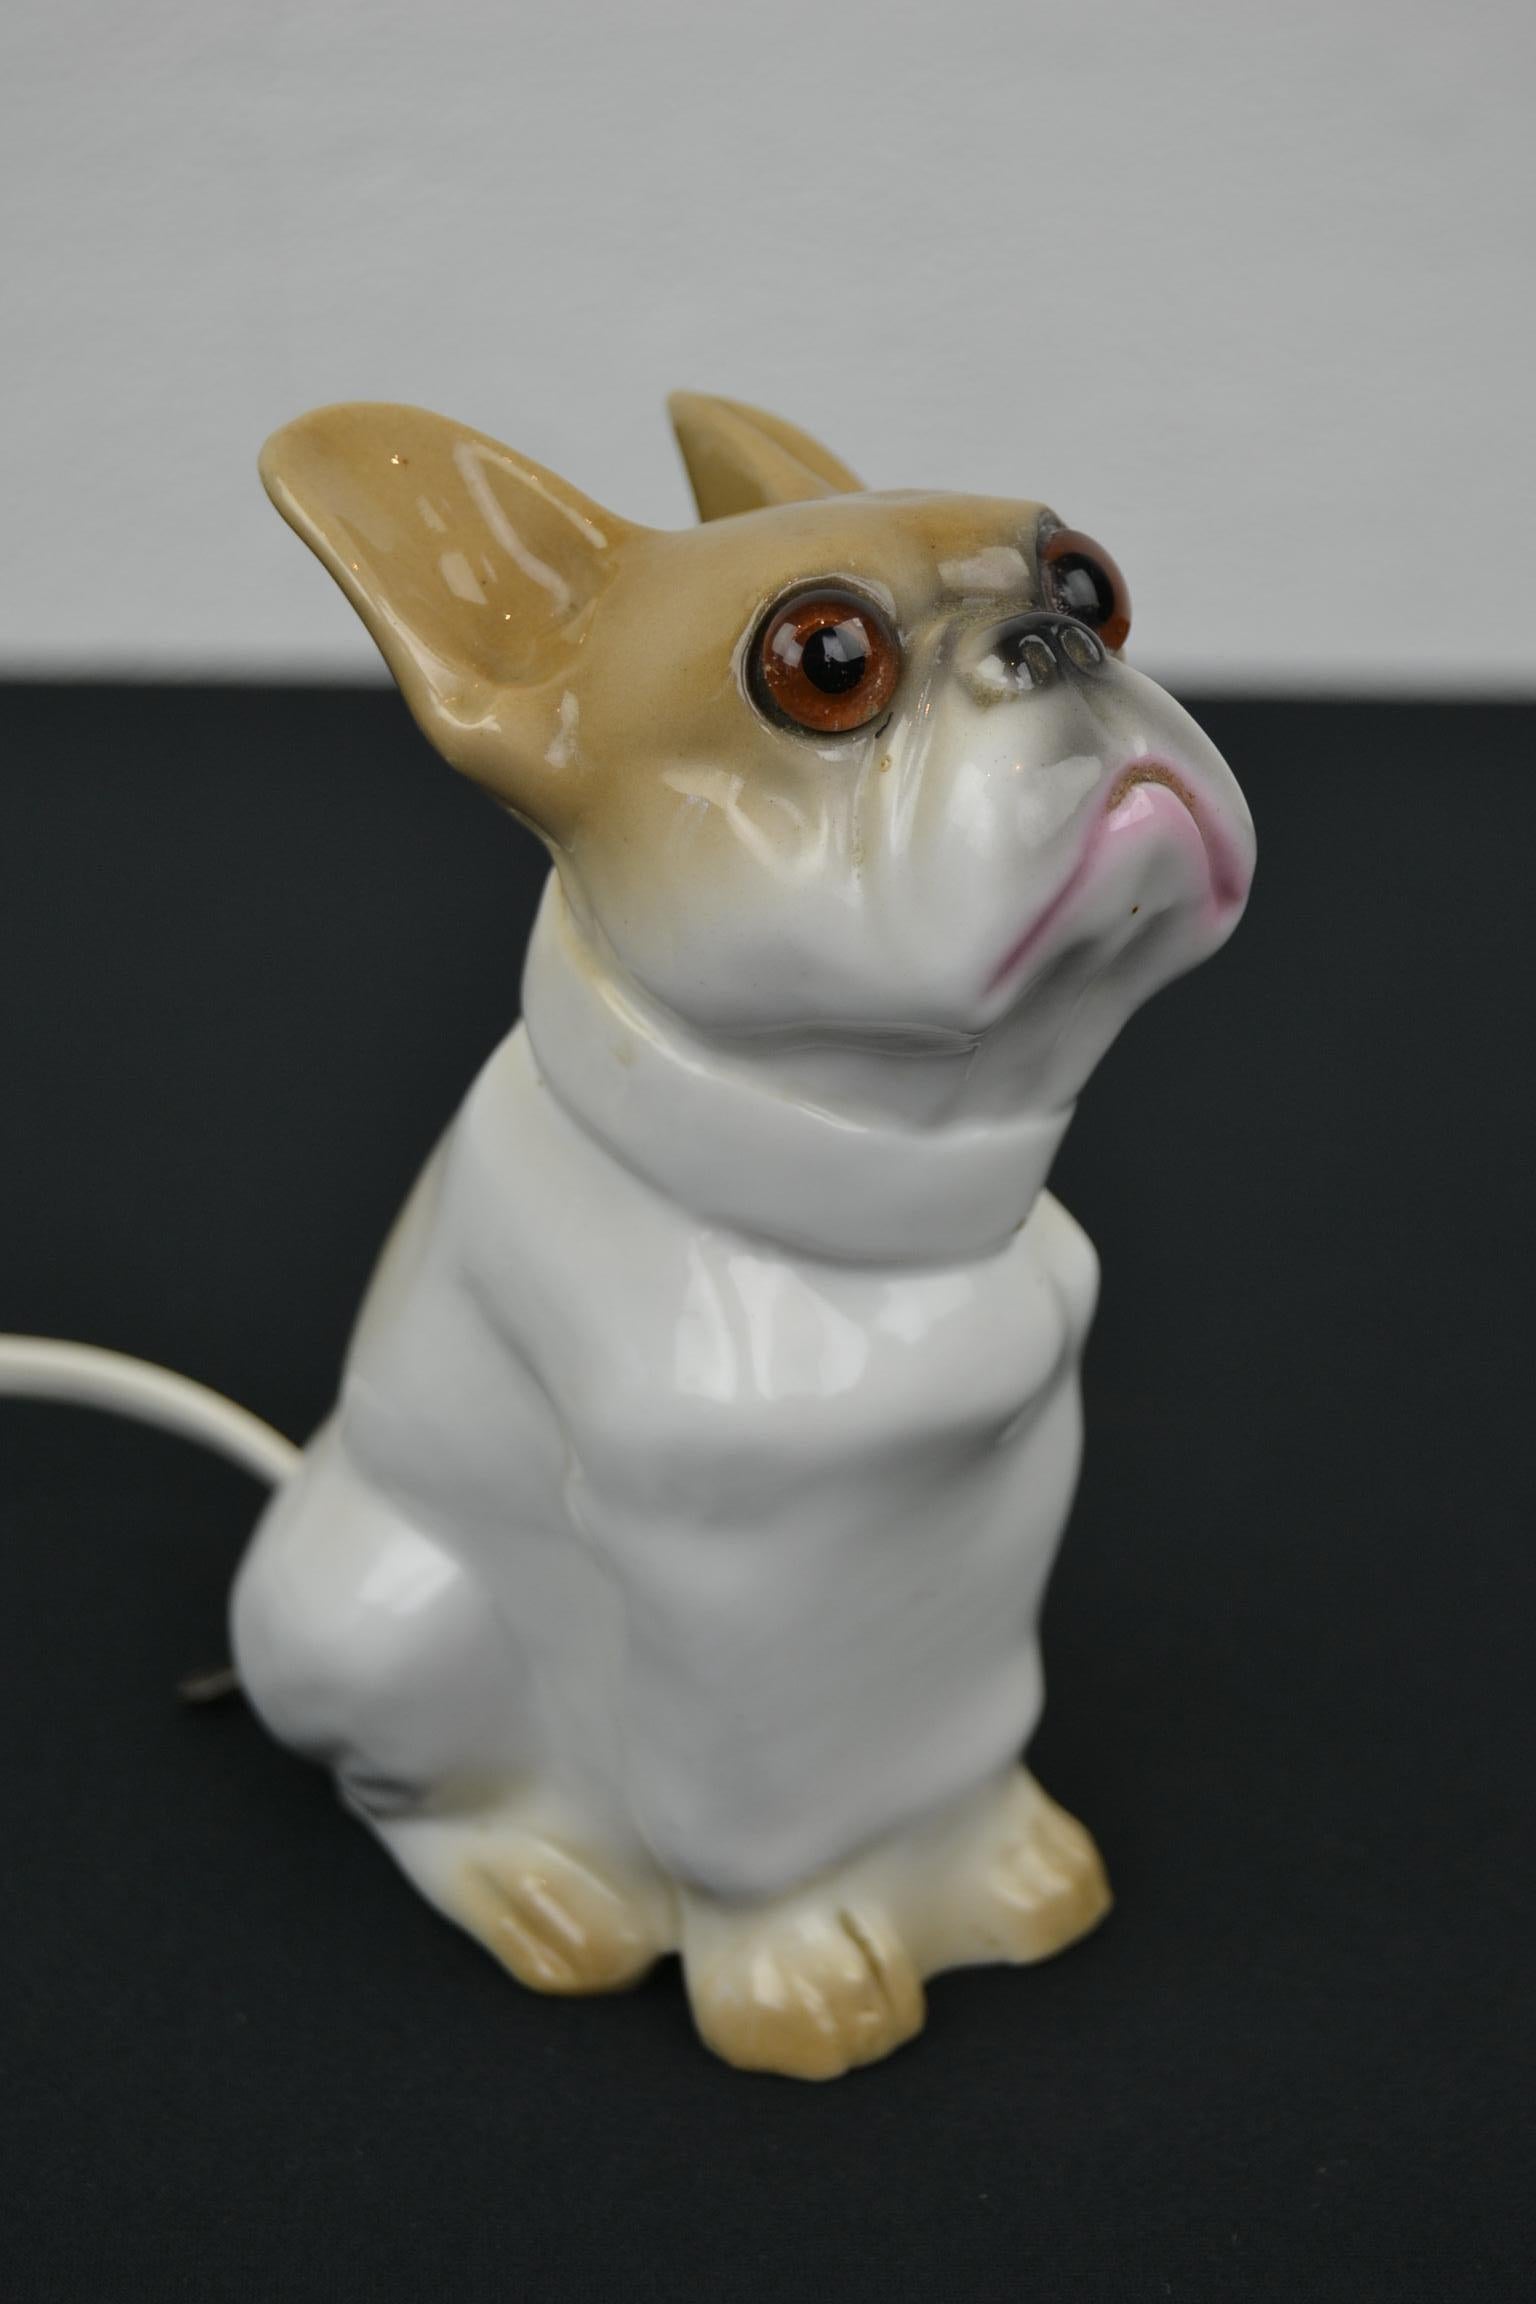 French Bulldog perfume light. 
A porcelain scuplture of a bulldog dog in the colors white and light brown / caramel brown. This air cleaner - perfume light has a porcelain stamp inside. 

This antique bulldog sculpture is in beautiful condition.